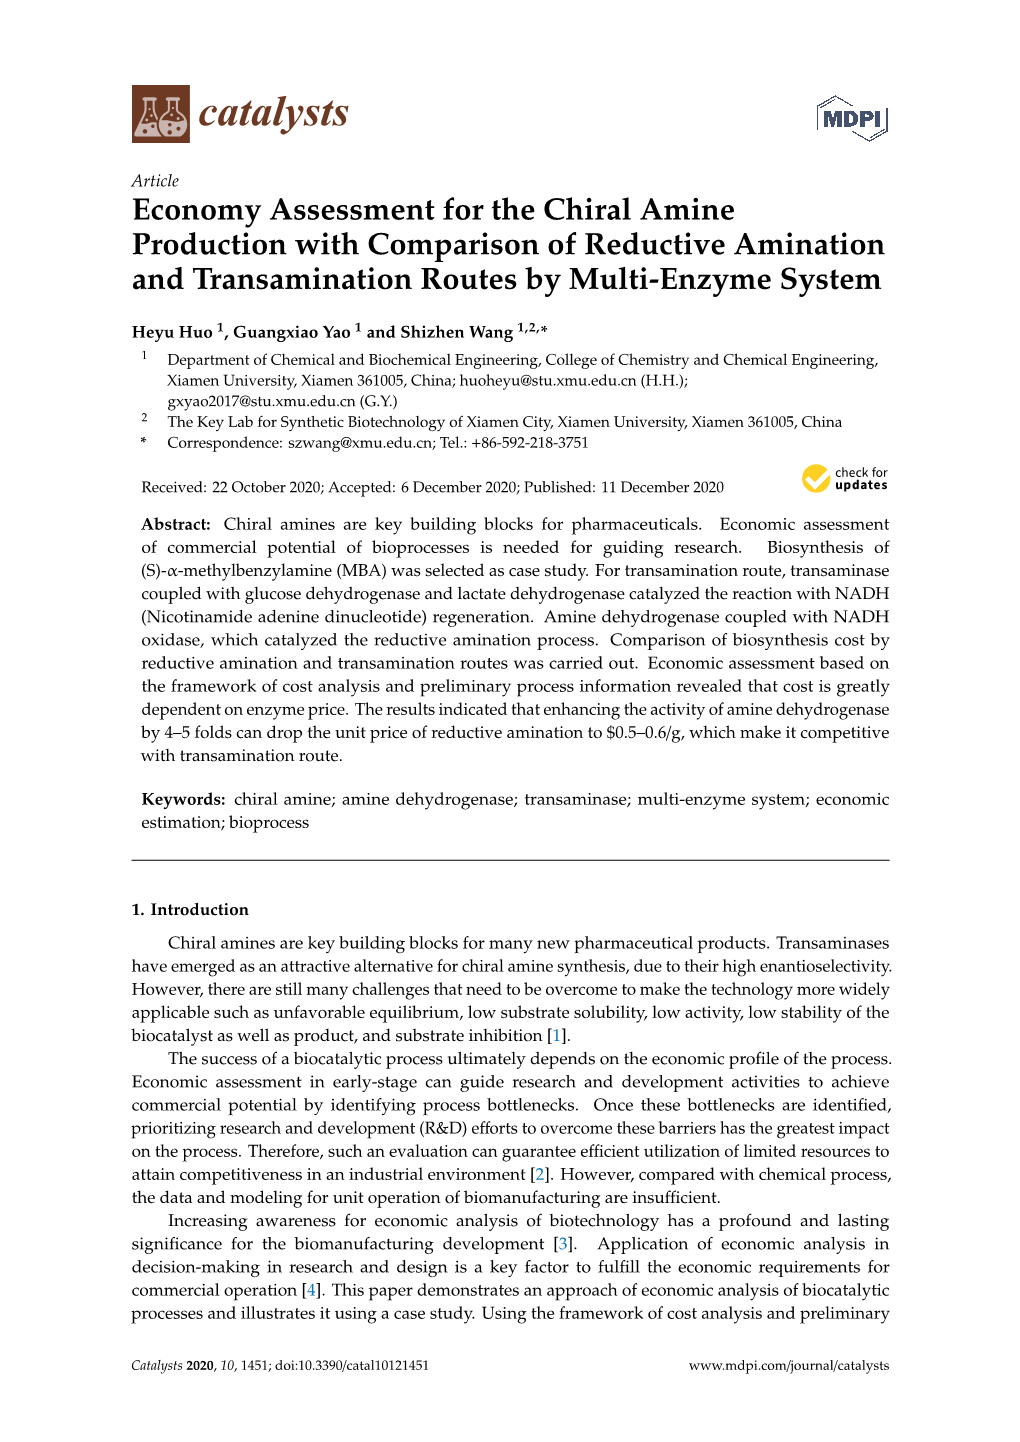 Economy Assessment for the Chiral Amine Production with Comparison of Reductive Amination and Transamination Routes by Multi-Enzyme System